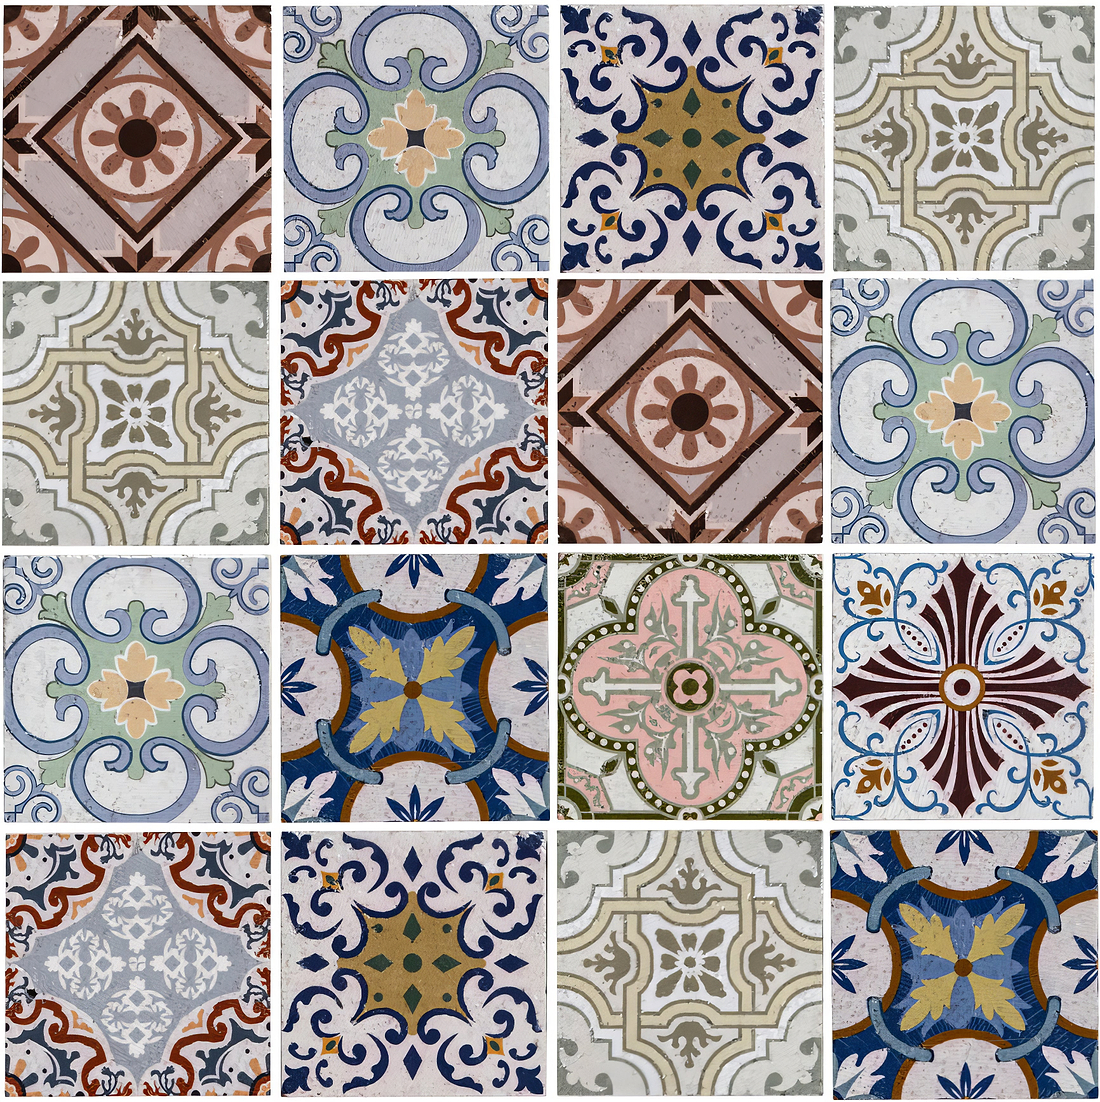 Fable Patterned Mosaic - Hyperion Tiles